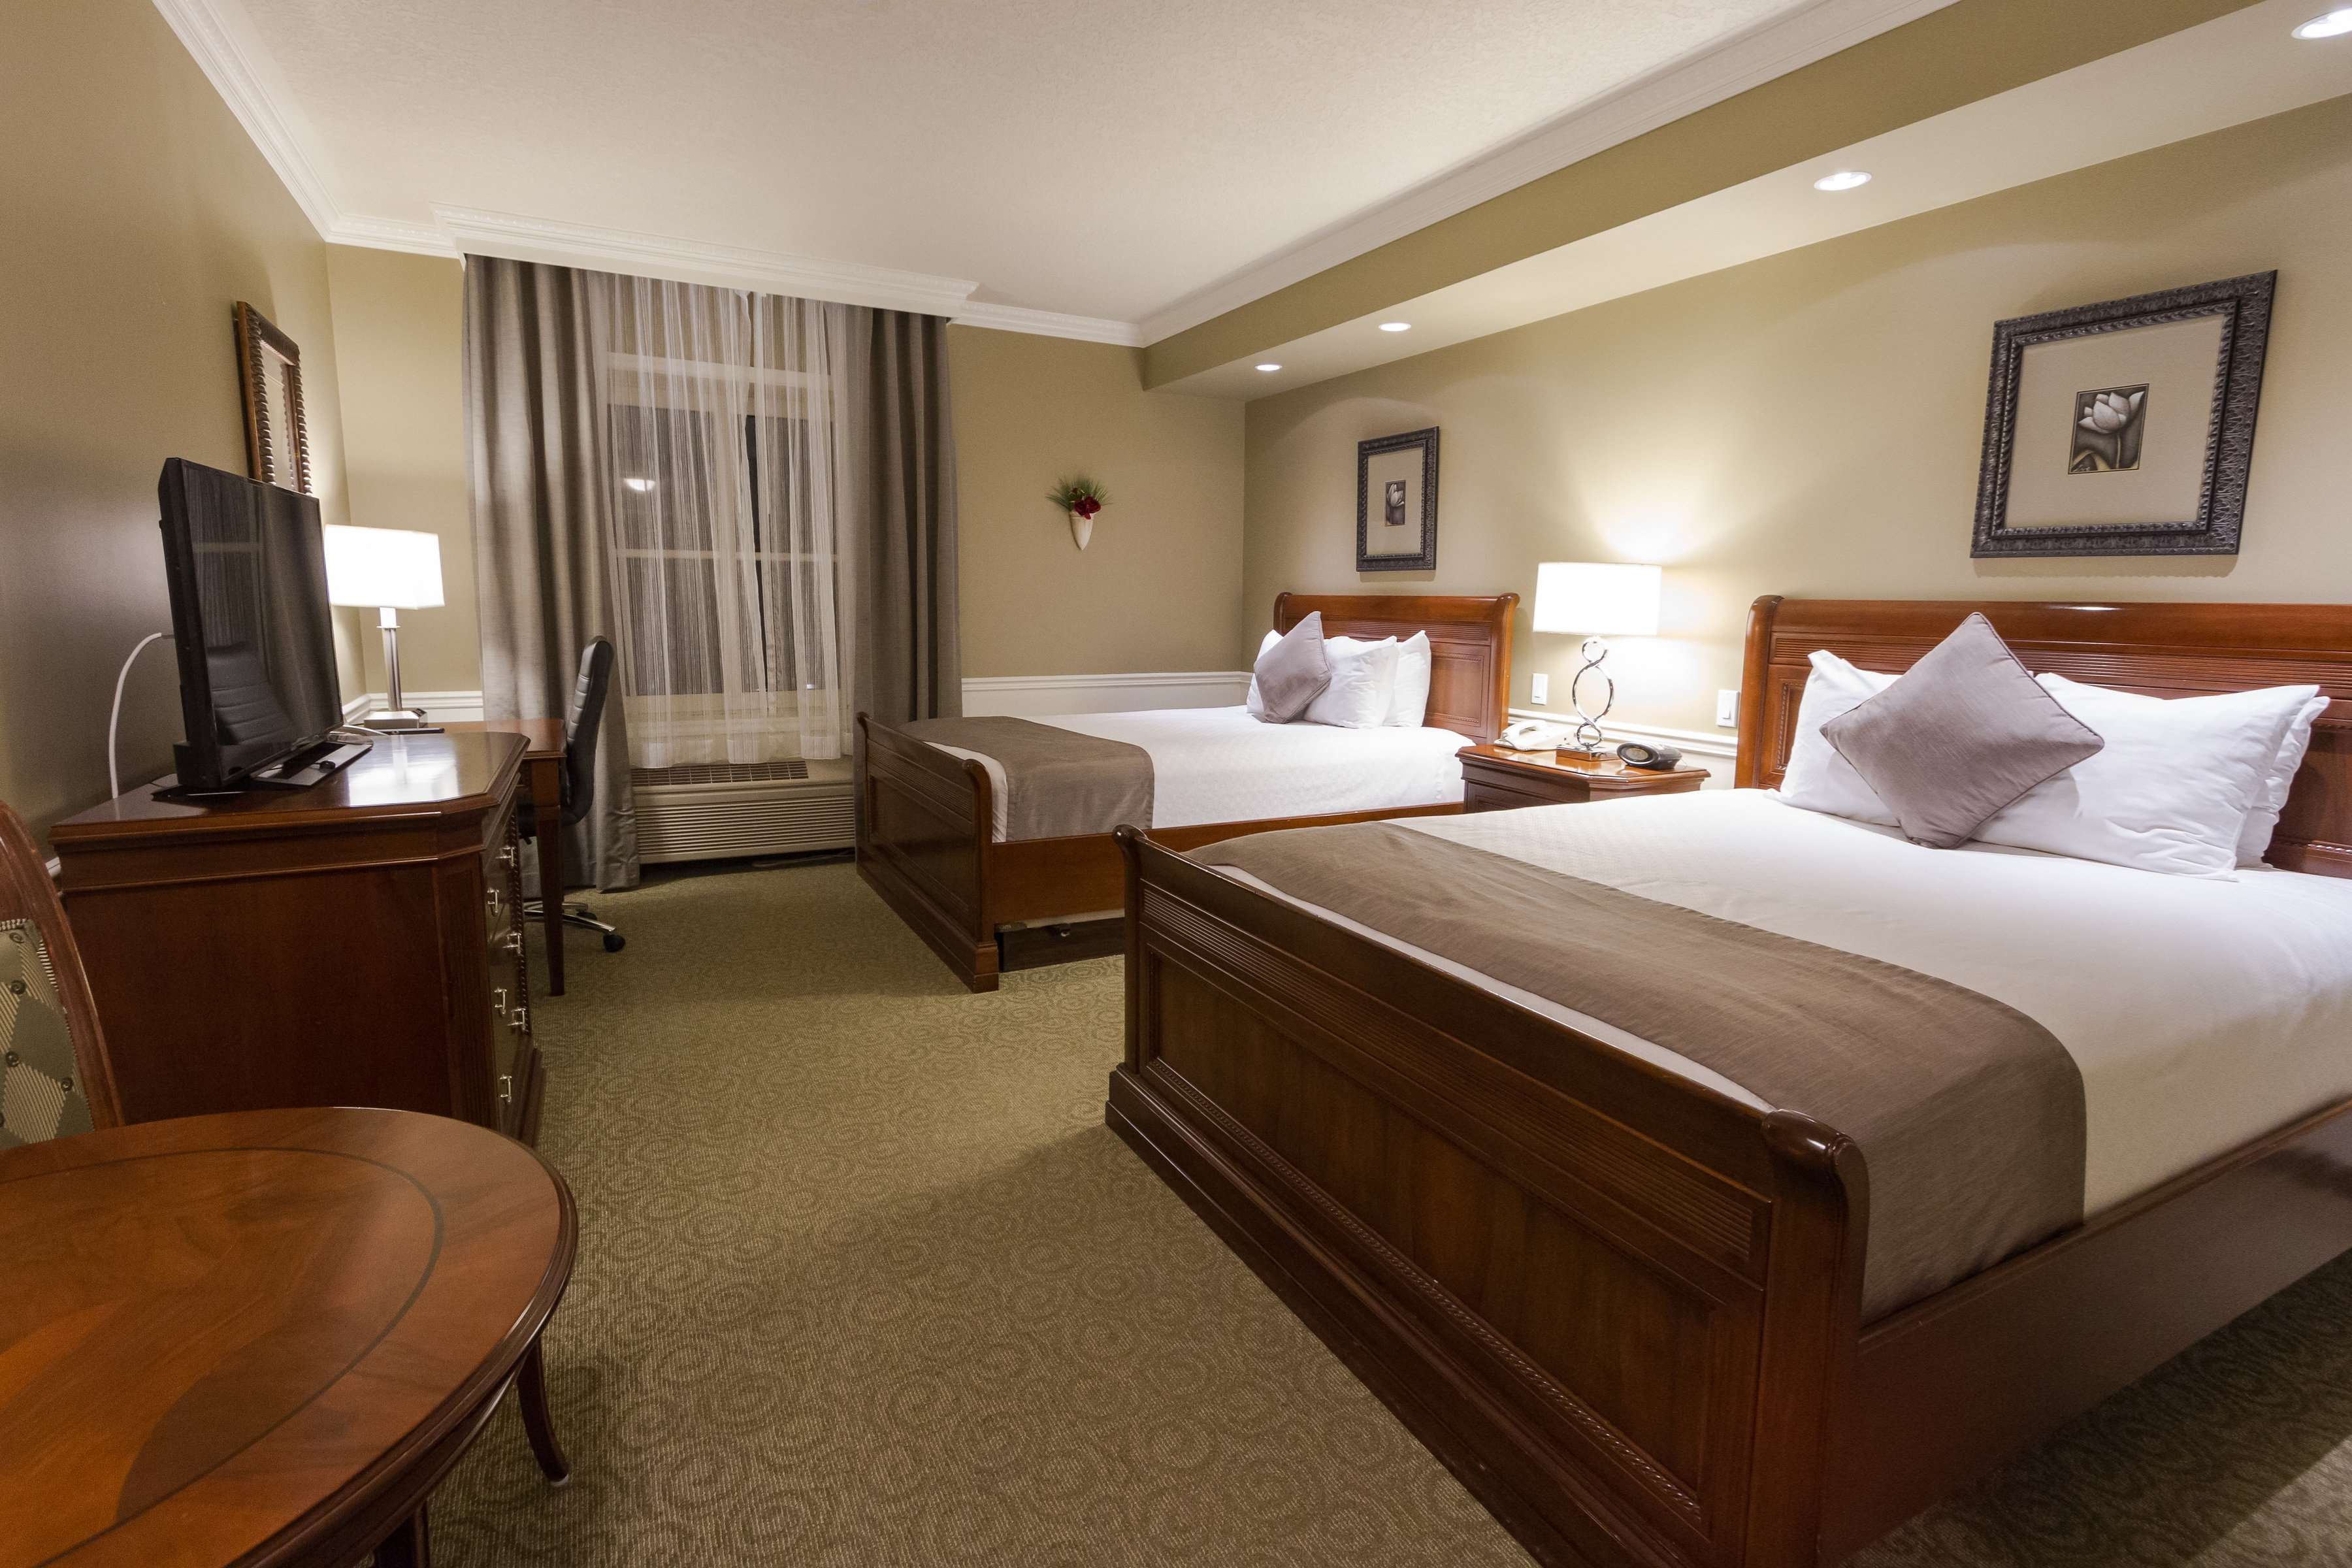 Two Queen Bed Guest Room Best Western Plus The Arden Park Hotel Stratford (519)275-2936